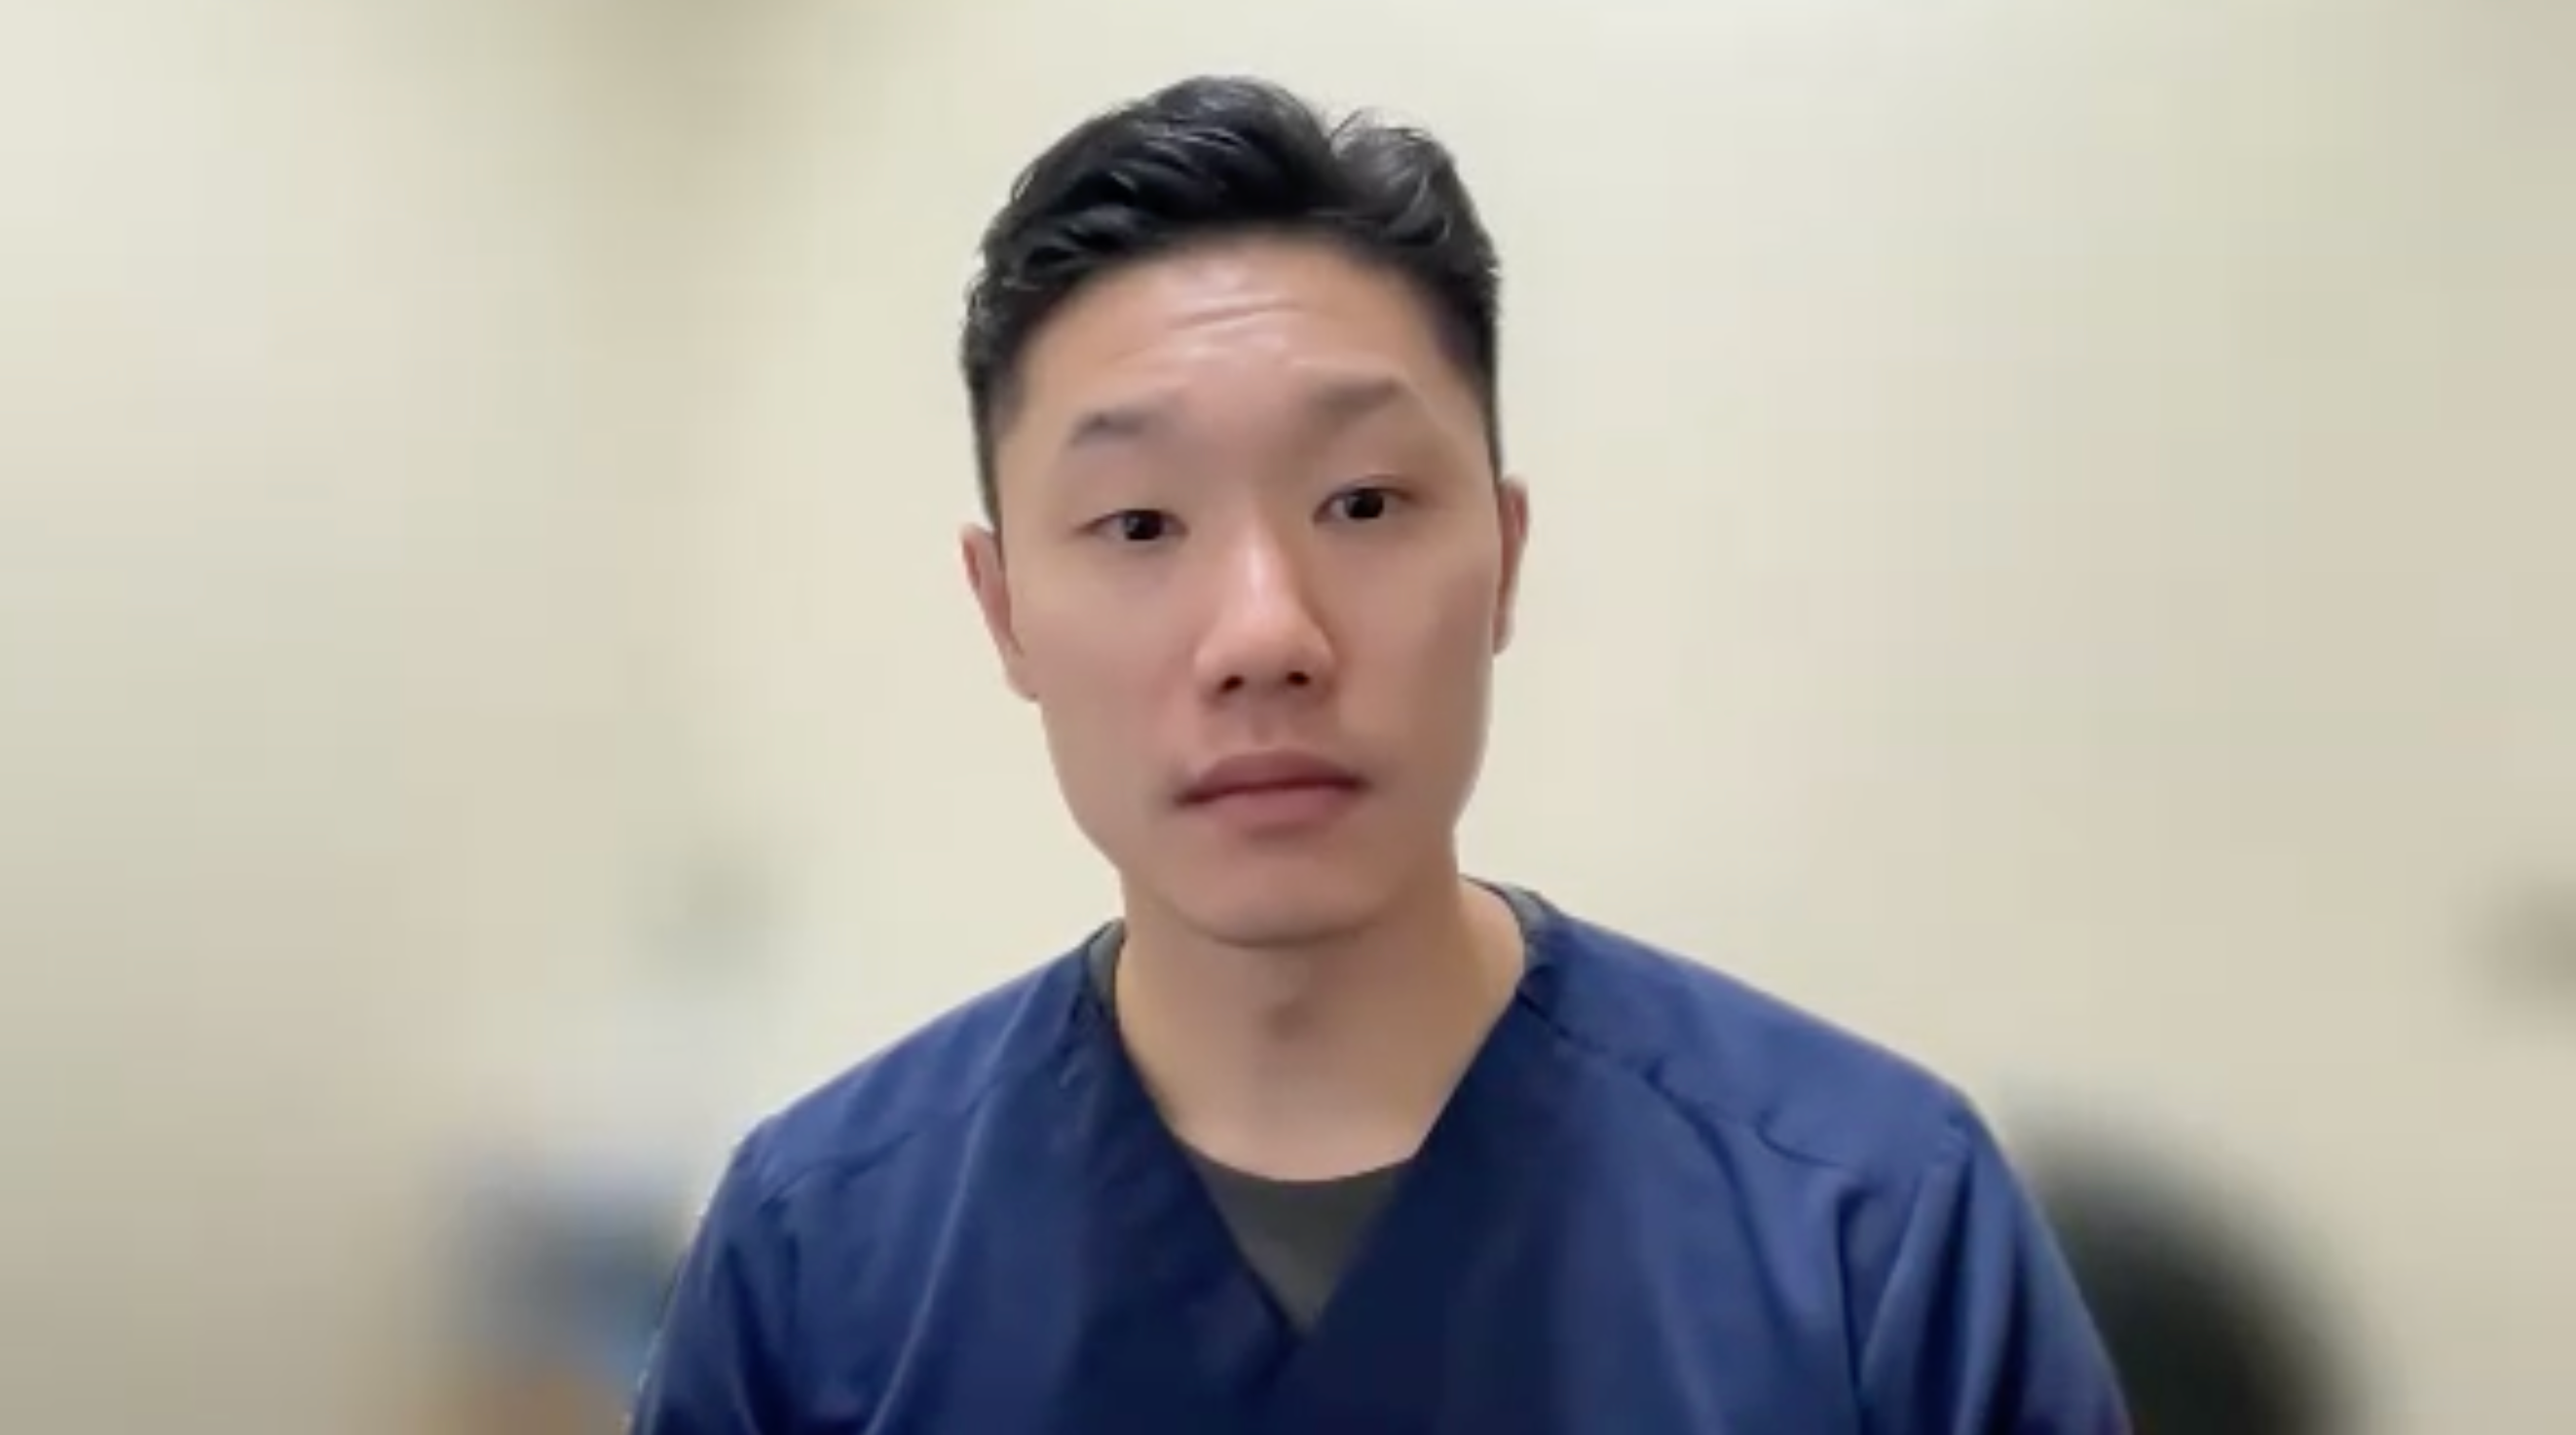 James Song, MD